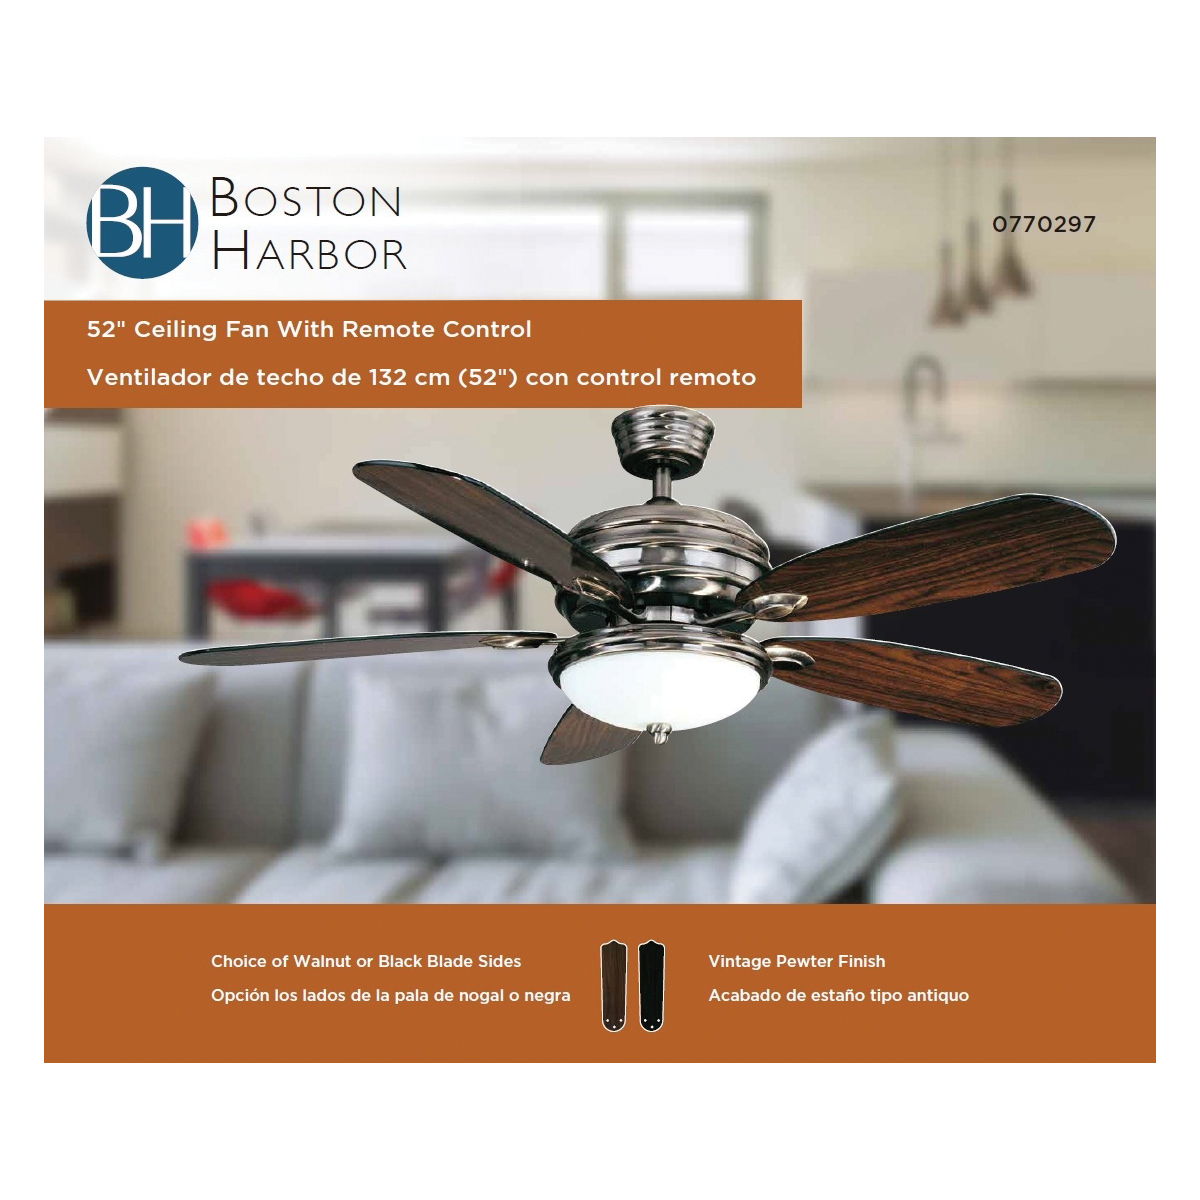 Boston Harbor AG624+1L-VPW Ceiling Fan, 5-Blade, Black/Walnut Blade, 52 in Sweep, 3-Speed, With Lights: Yes - 3